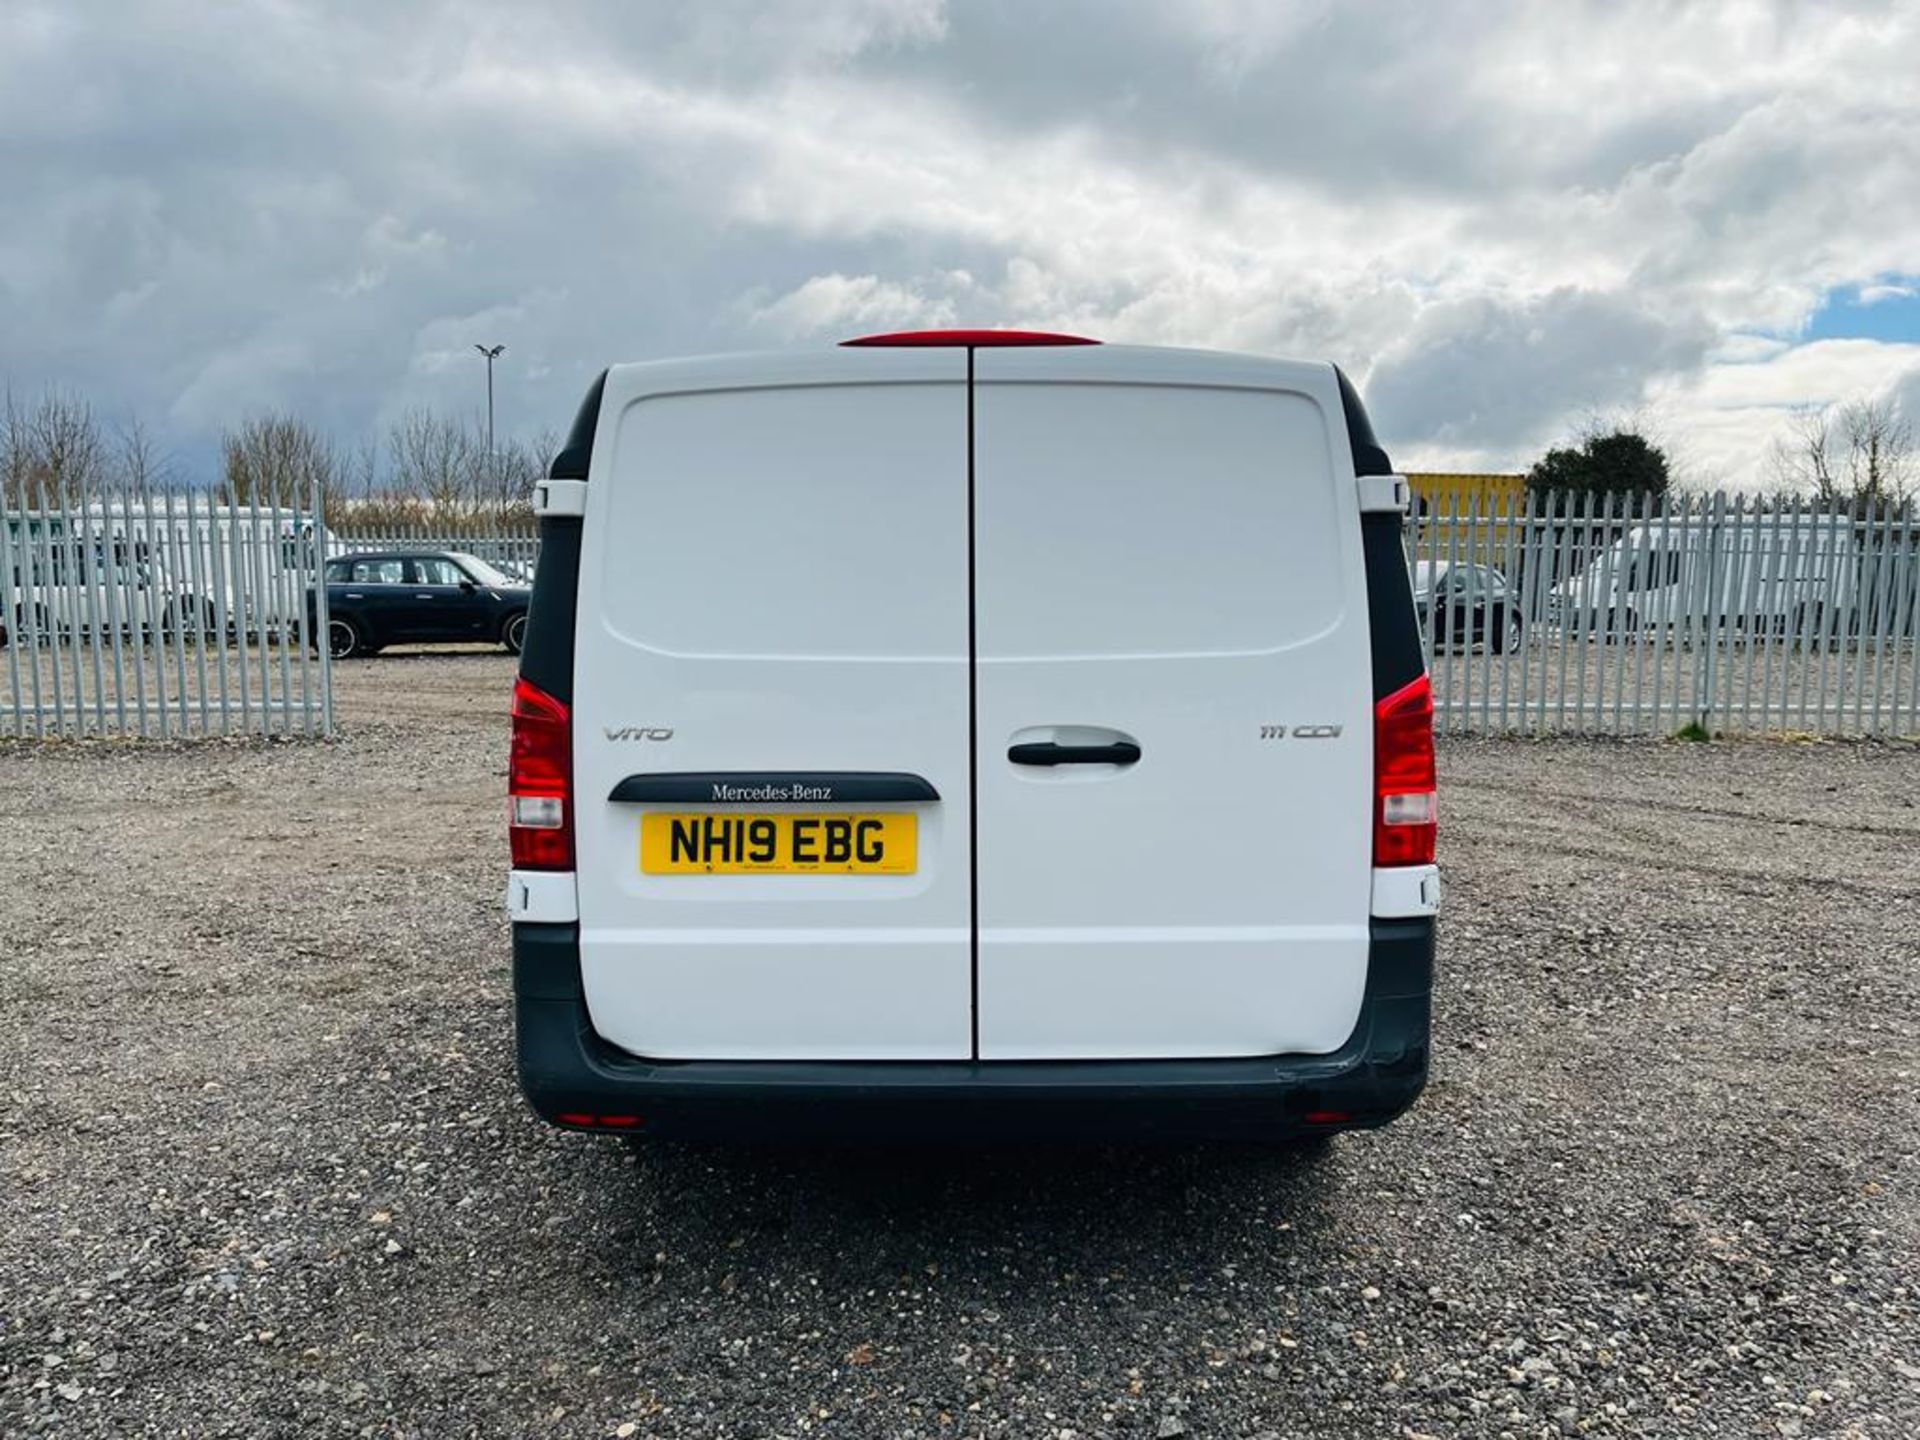 Mercedes Benz Vito 1.6 111 CDI FWD 2019 '19 Reg' - ULEZ Compliant - Only 85,733 Miles - Image 7 of 24